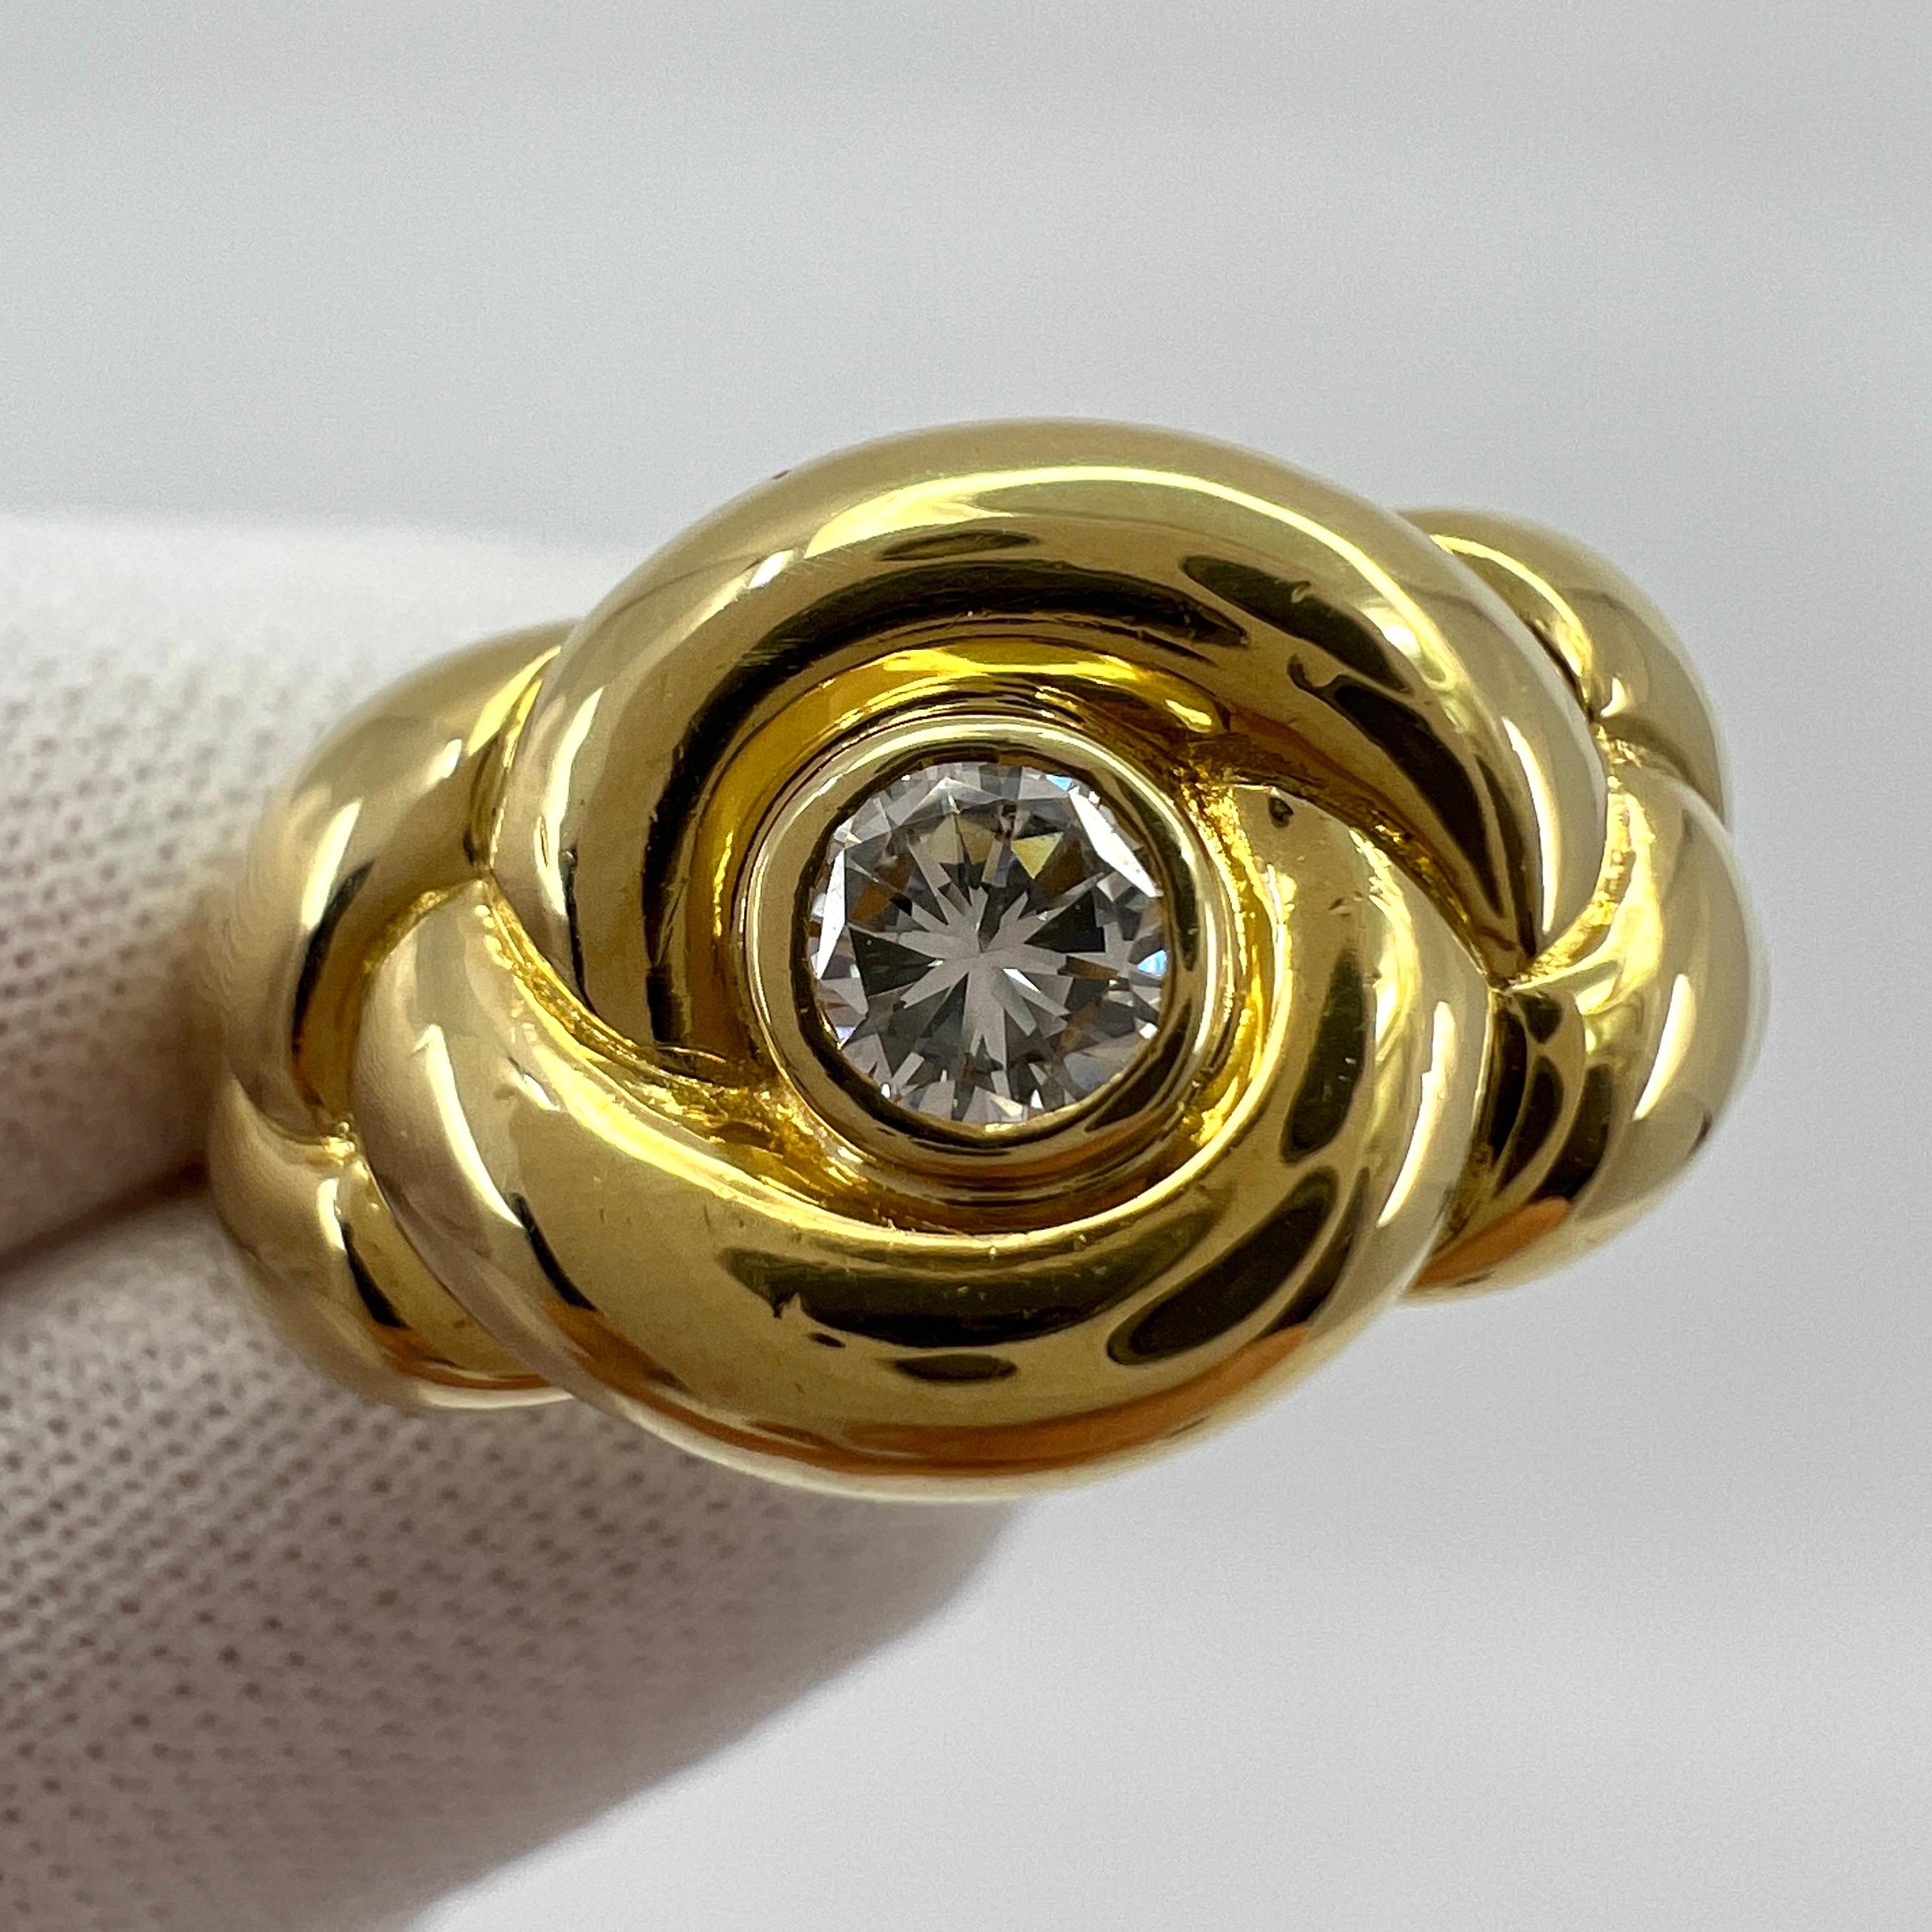 Vintage Van Cleef & Arpels 18 Karat Yellow Gold Braid Rope Diamond Ring.

A stunning vintage VCA ring with a unique braid/rope design and an excellent quality 3.5mm diamond (approx. 0.17ct). The diamond has excellent F/G colour and VVS